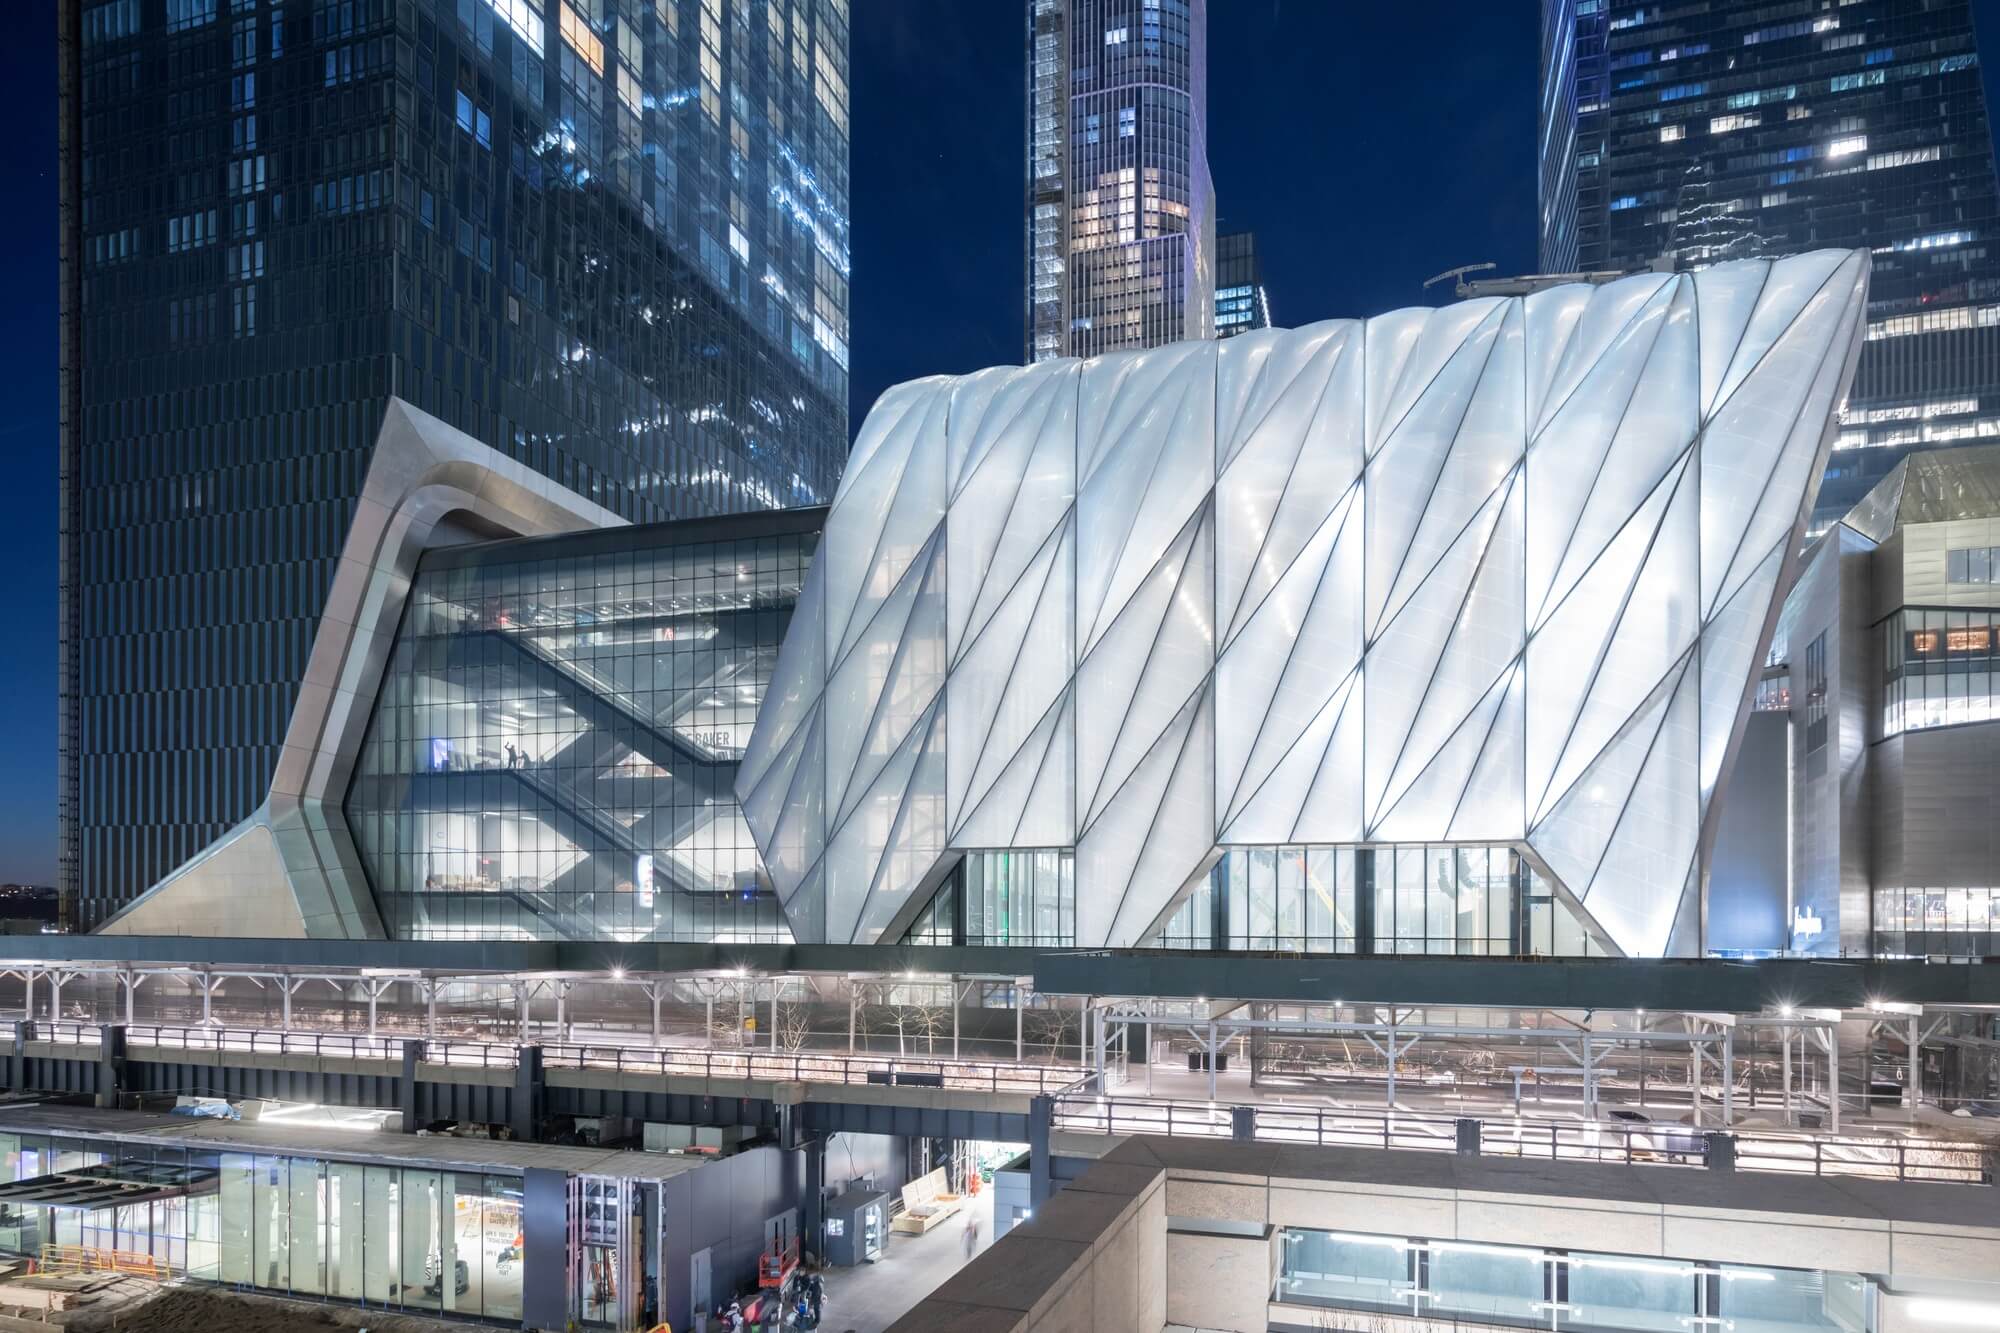 The Shed. Diller Scofidio + Renfro